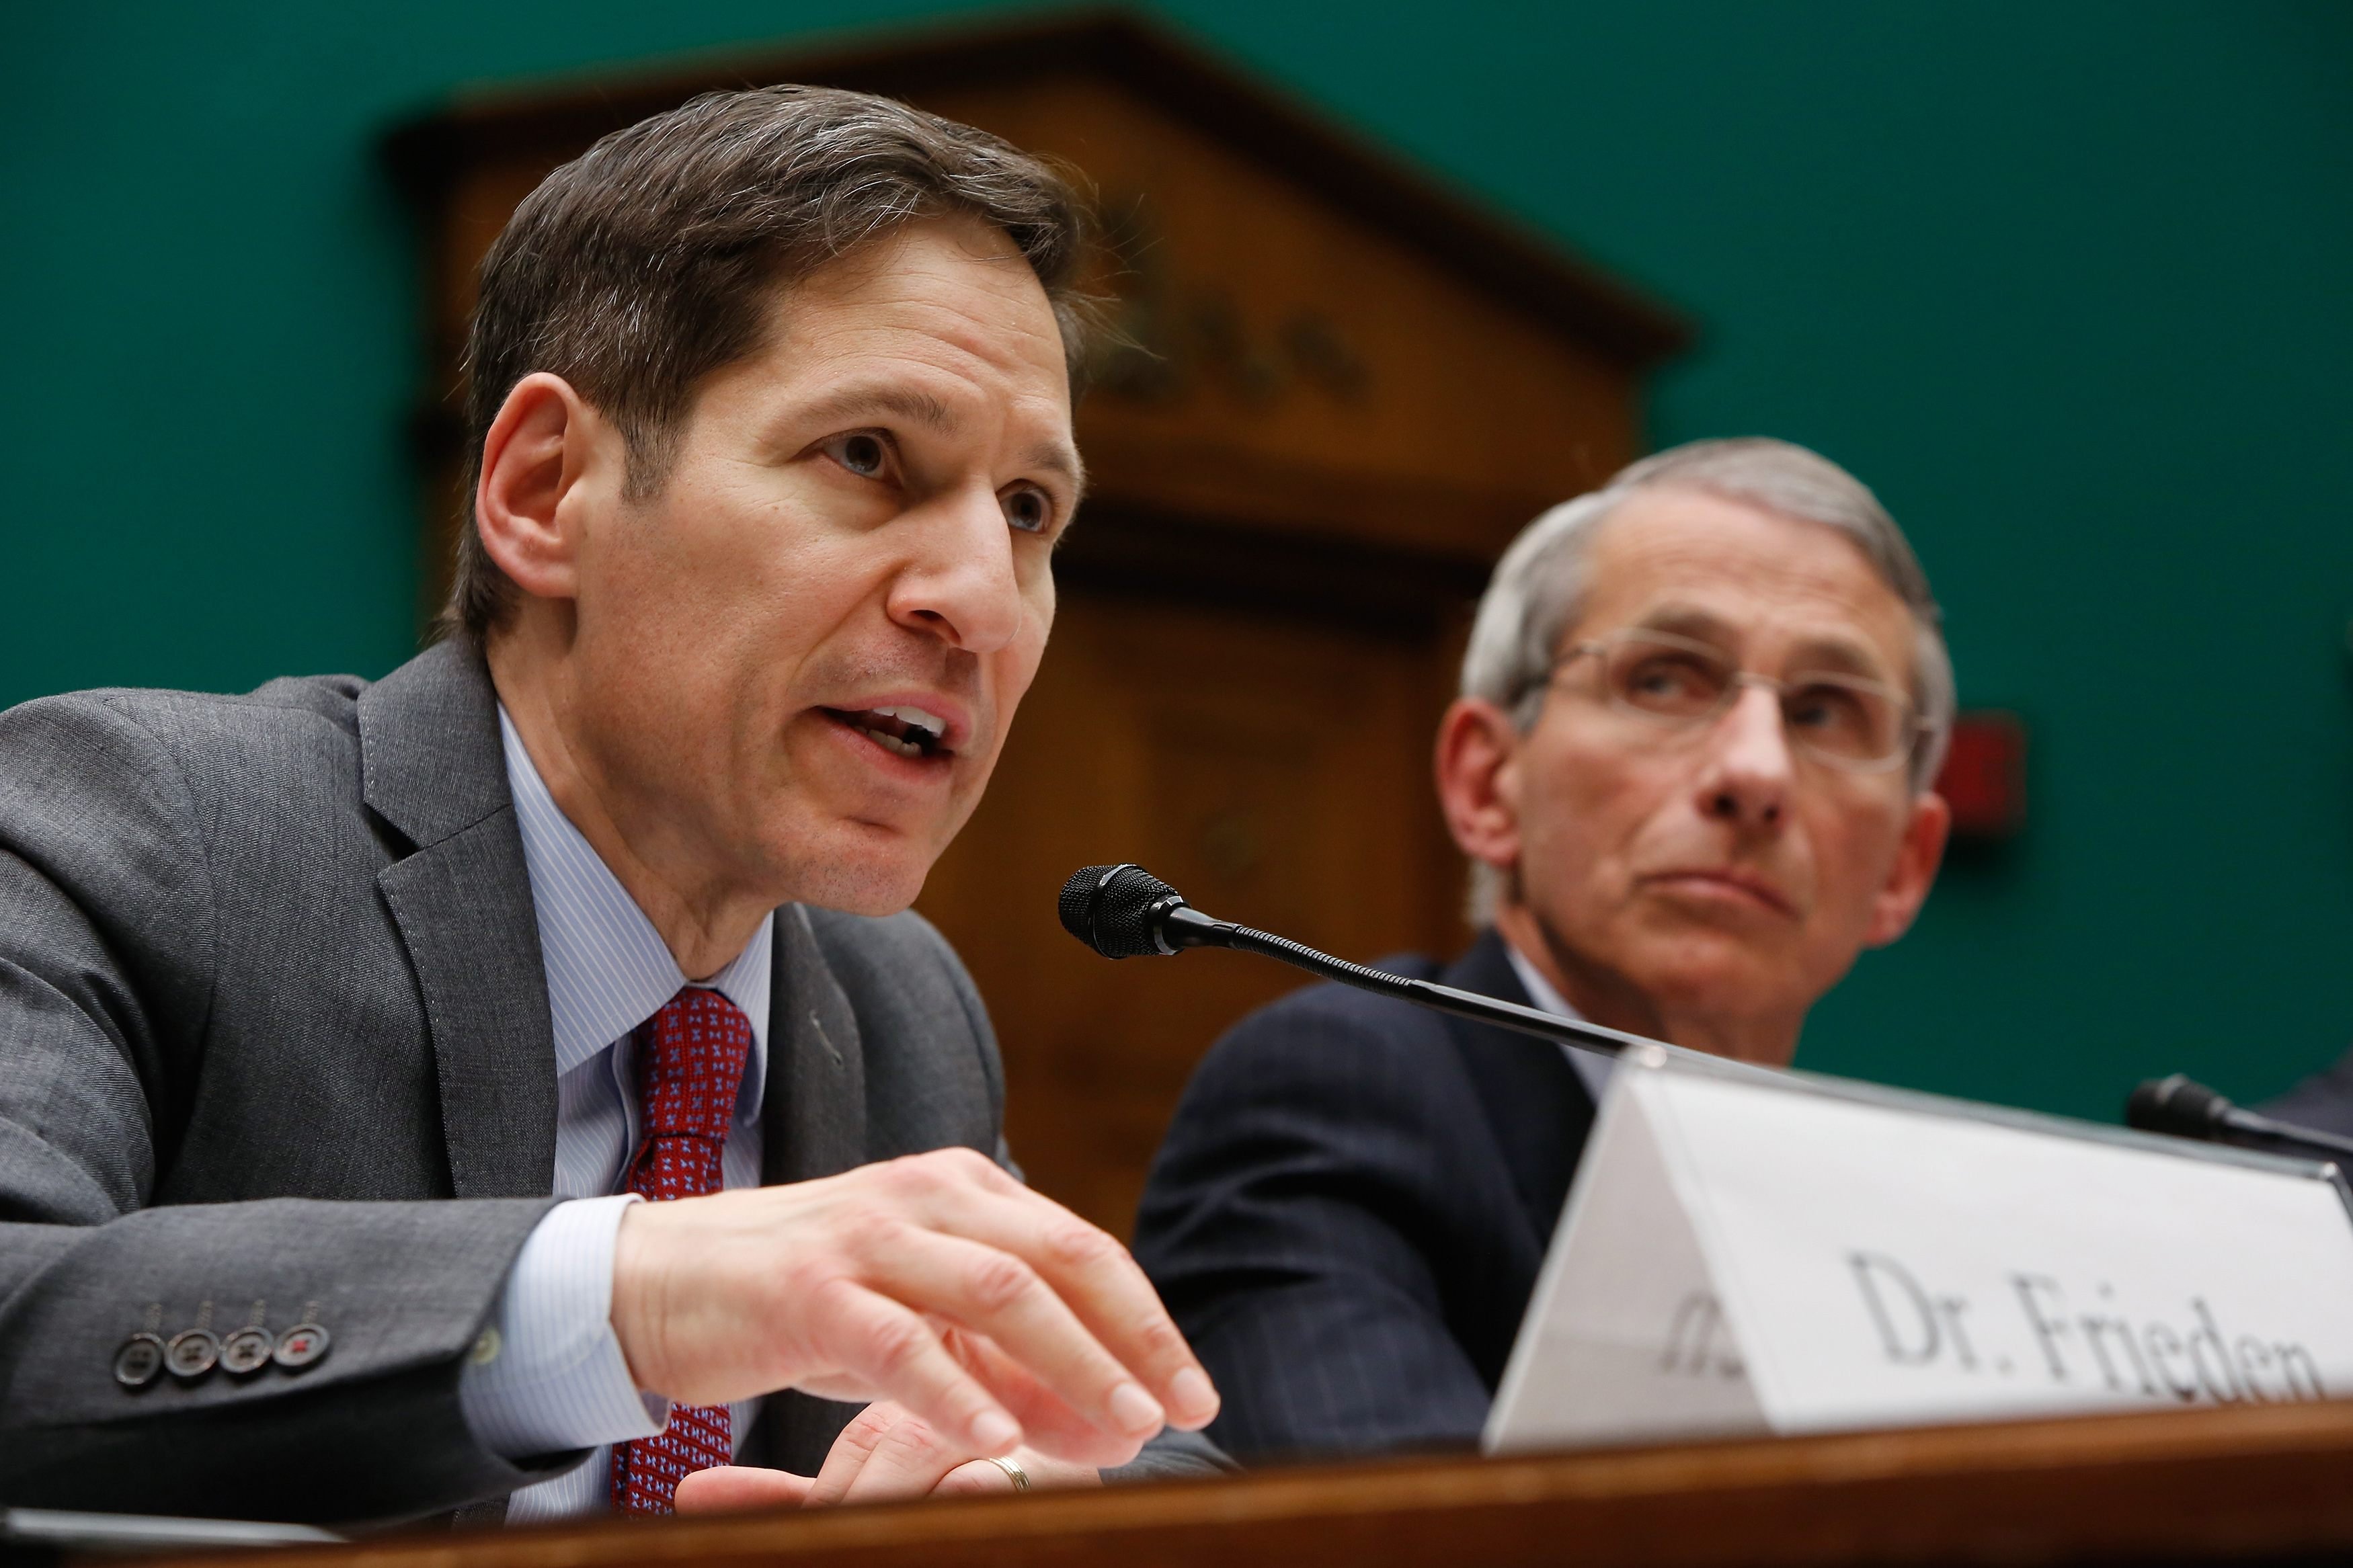 From Left: Center for Disease Control and Prevention Director Tom Frieden and National Institute of Allergy and Infectious Disease Director Anthony Fauci testify before a House Energy and Commerce Oversight and Investigations Subcommittee hearing on the U.S. response to the Ebola crisis, in Washington D.C. on Oct. 16, 2014. (Jonathan Ernst—Reuters)